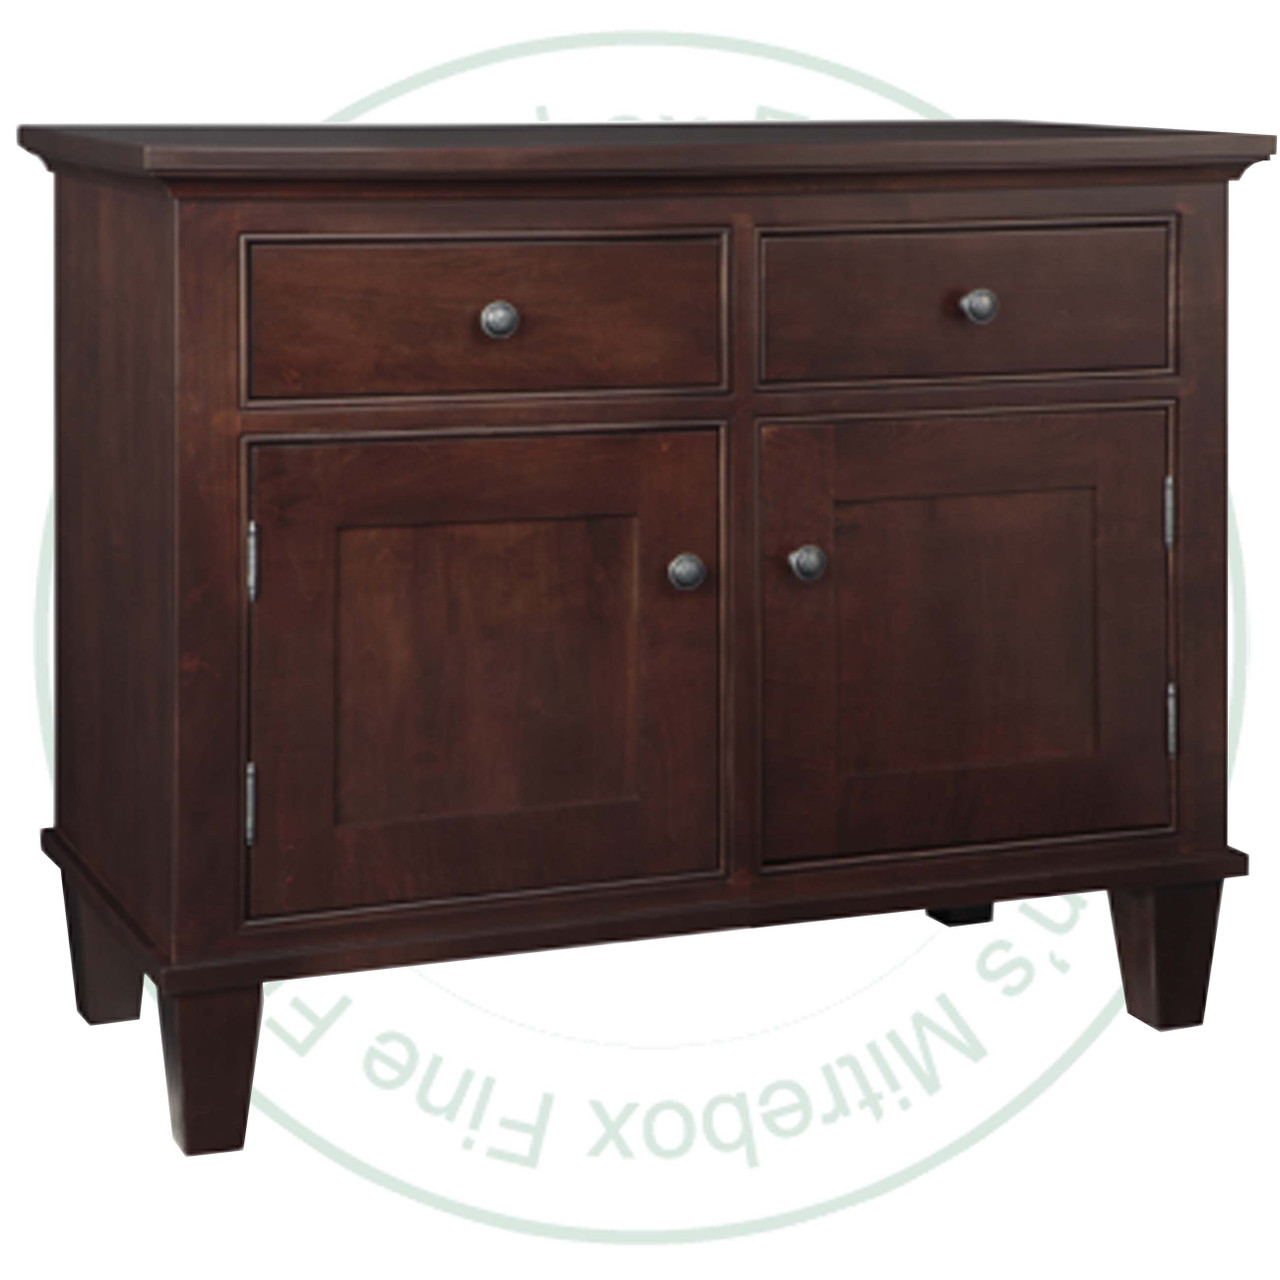 Maple Georgetown Sideboard 19.5'' Deep x 43'' Wide x 35.5'' High With 2 Wood Doors And 2 Drawers